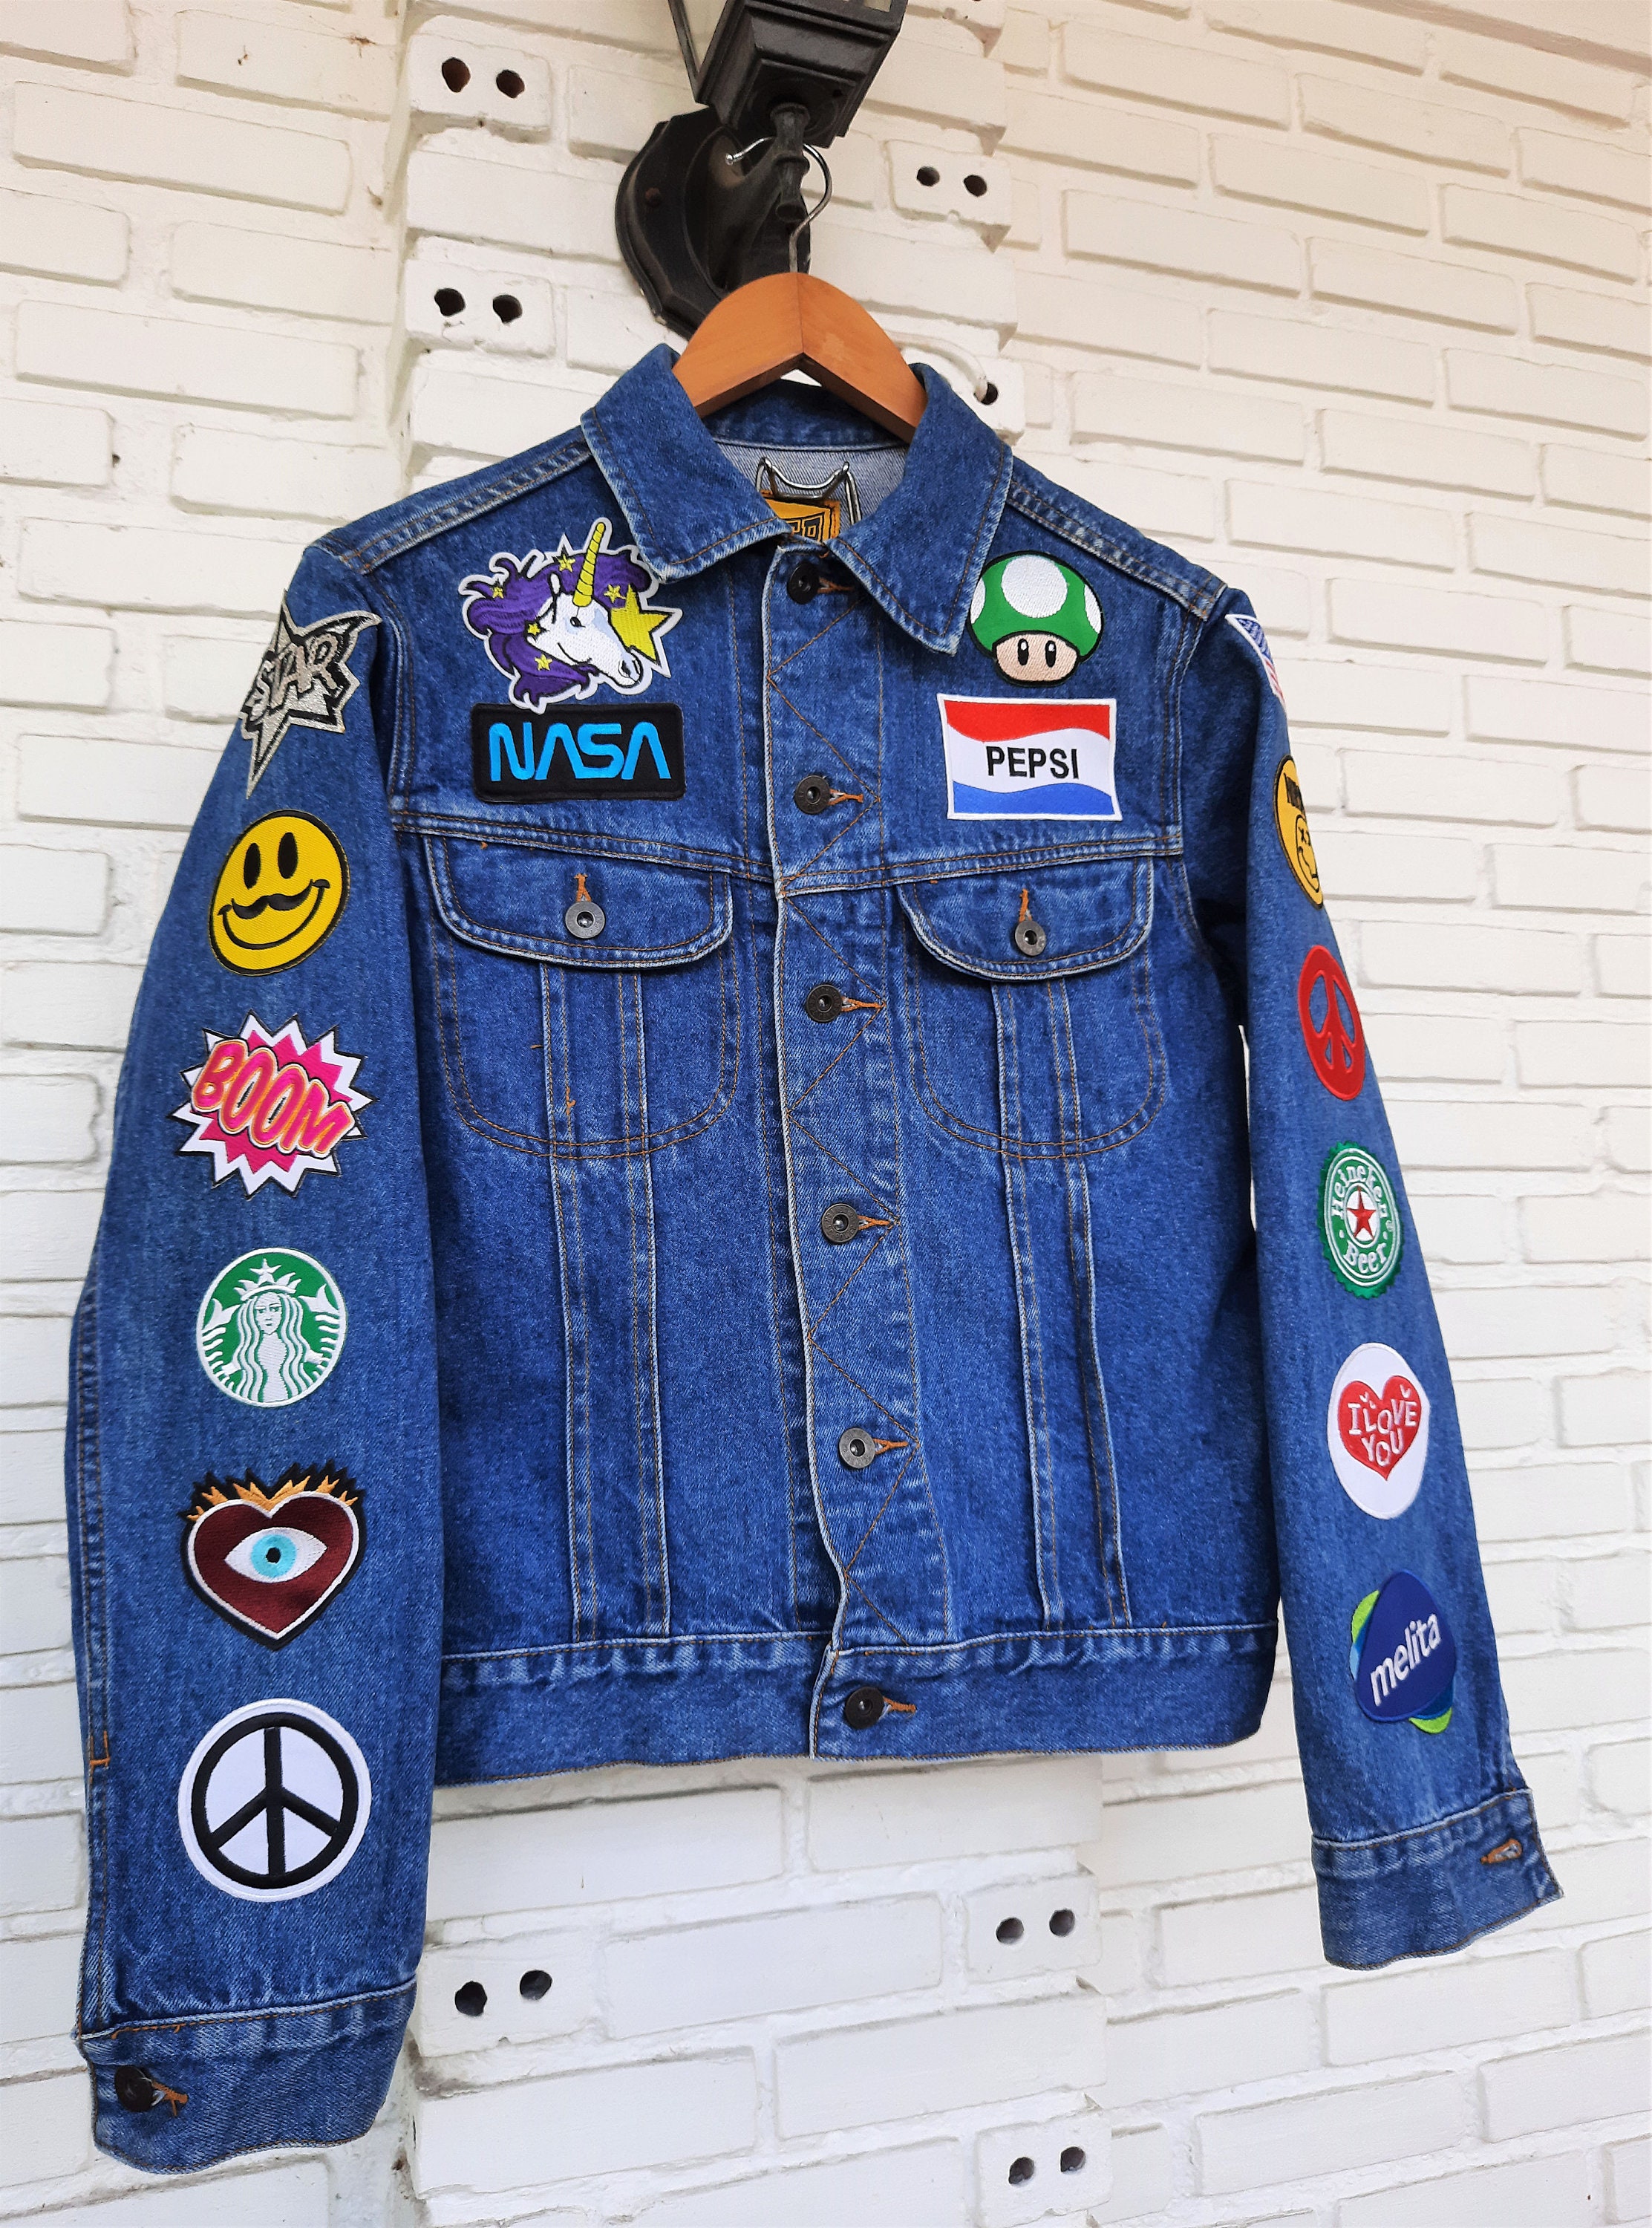 Patched Denim / Upcycled Jacket with Patches / Reworked | Etsy